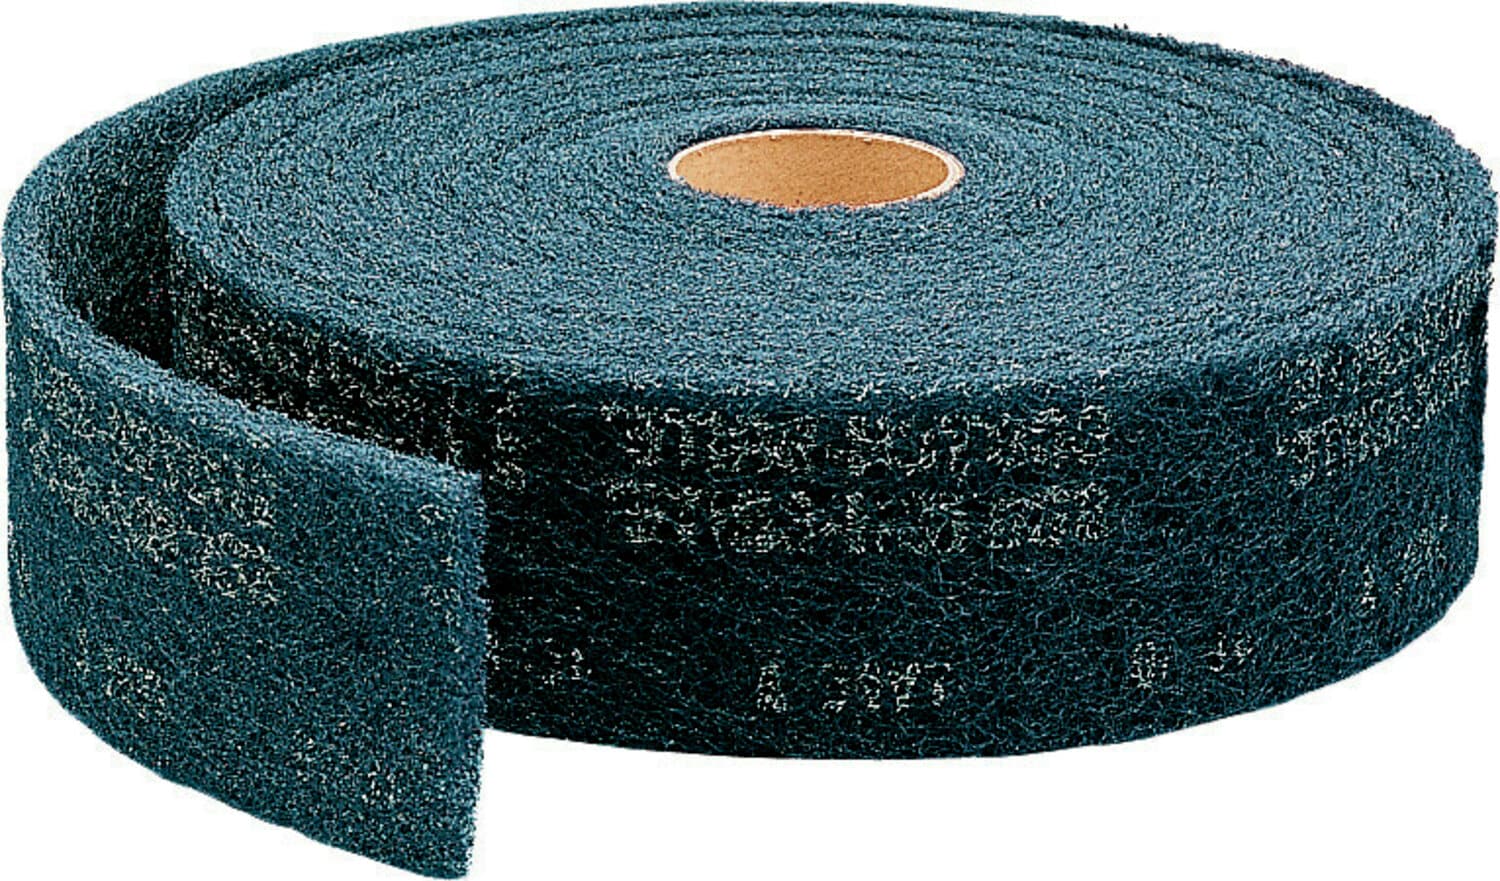 7100244391 - Scotch-Brite Surface Conditioning Roll, SC-RL, A/O Very Fine, 48 in x
75 ft, 1 ea/Pallet